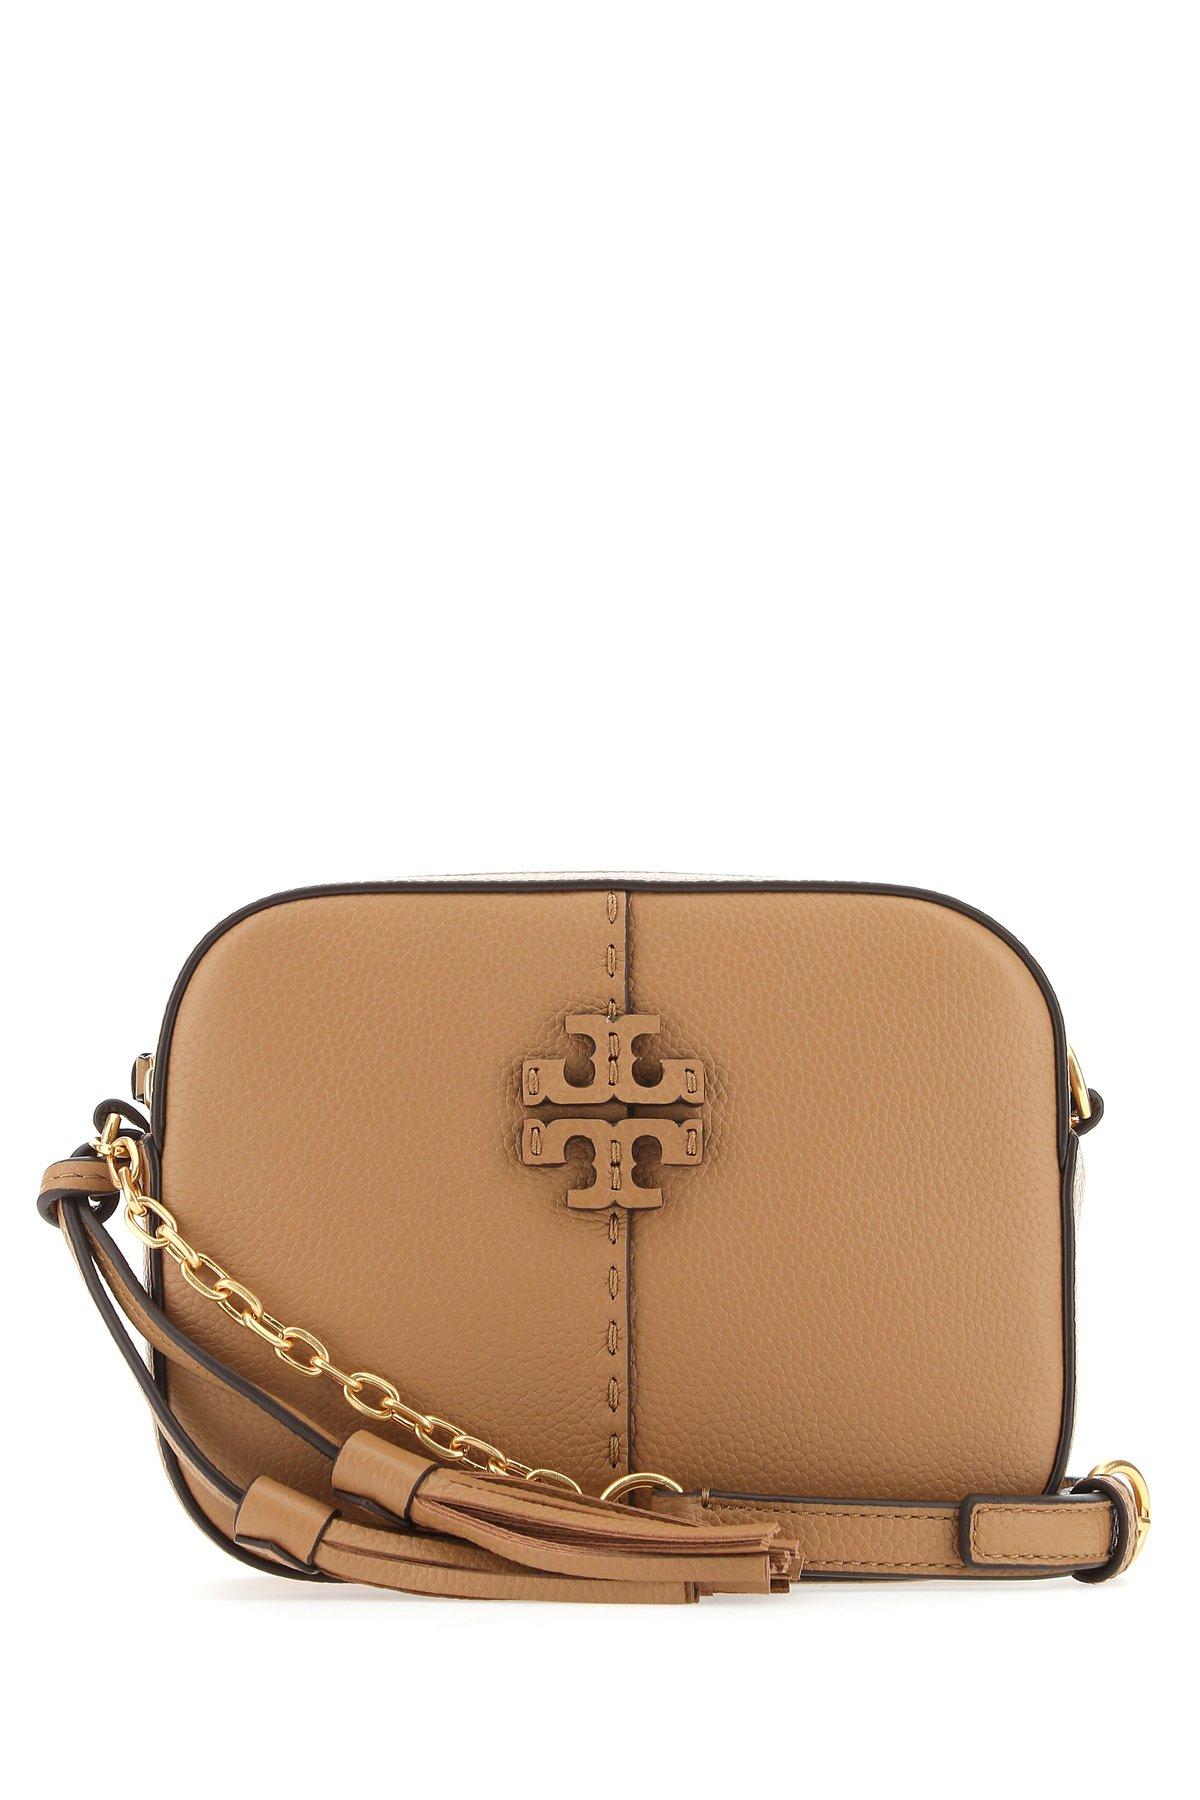 Tory Burch Leather Mcgraw Crossbody Bag in Brown - Lyst